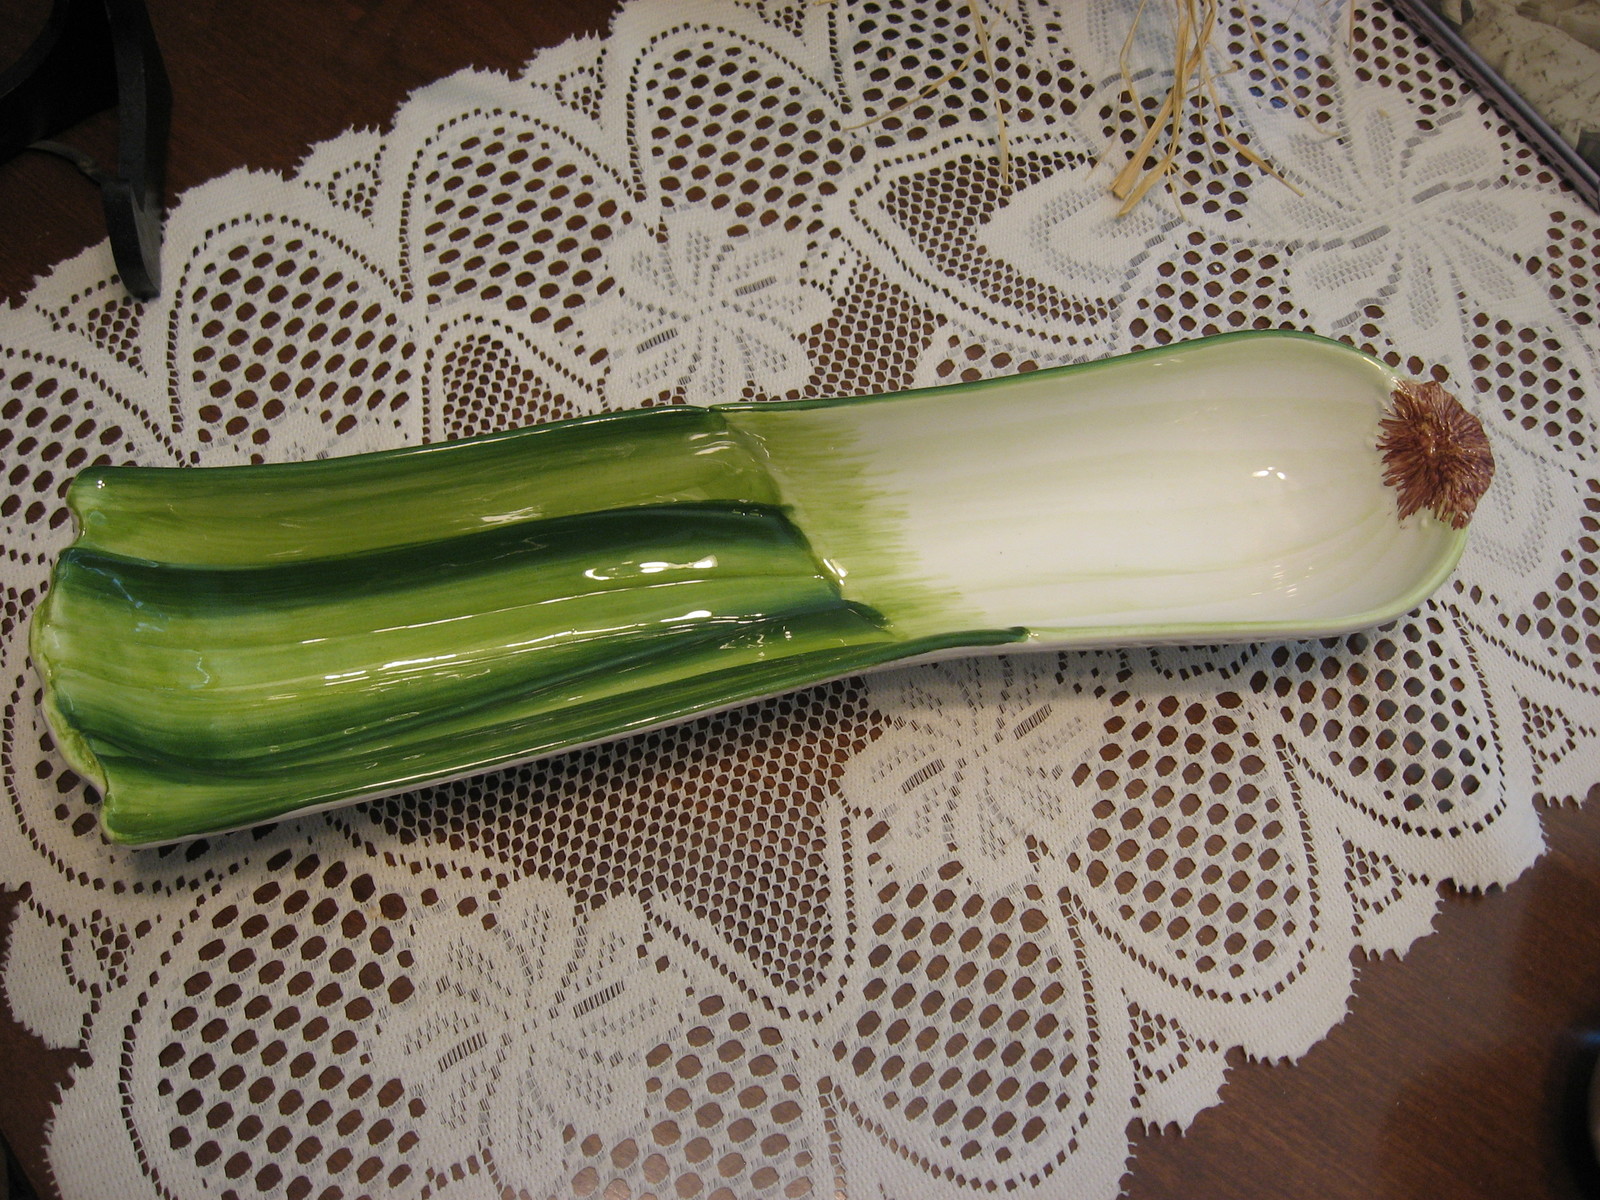 Serving Platter-Leek or Scallion Shaped-Hand Painted Ceramic-Italy - $20.00